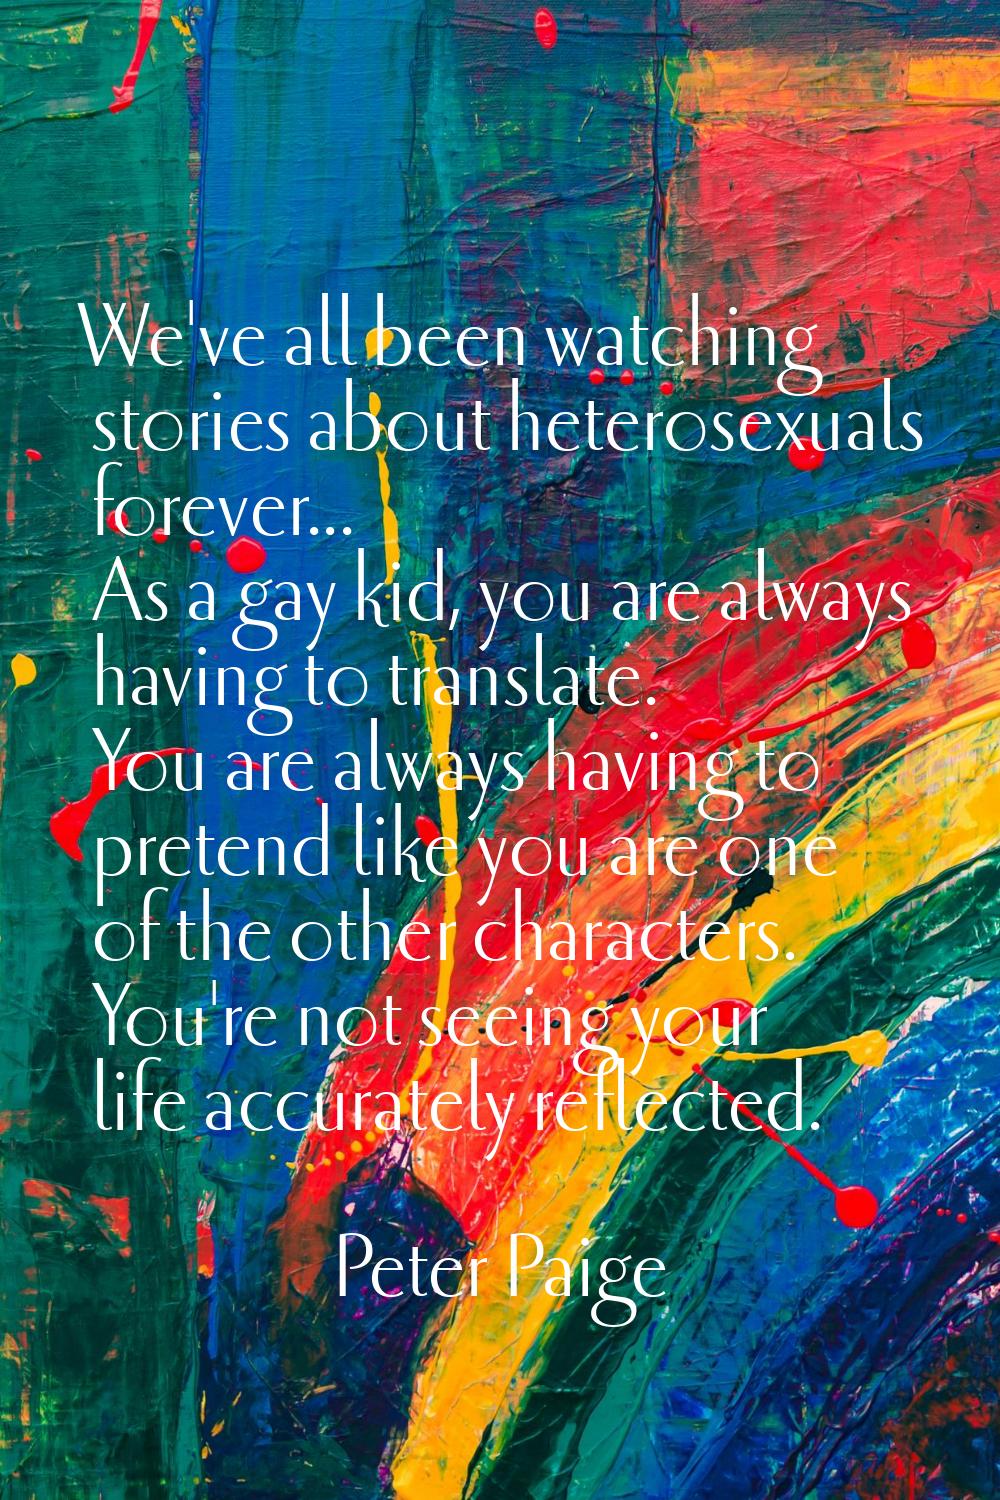 We've all been watching stories about heterosexuals forever... As a gay kid, you are always having 